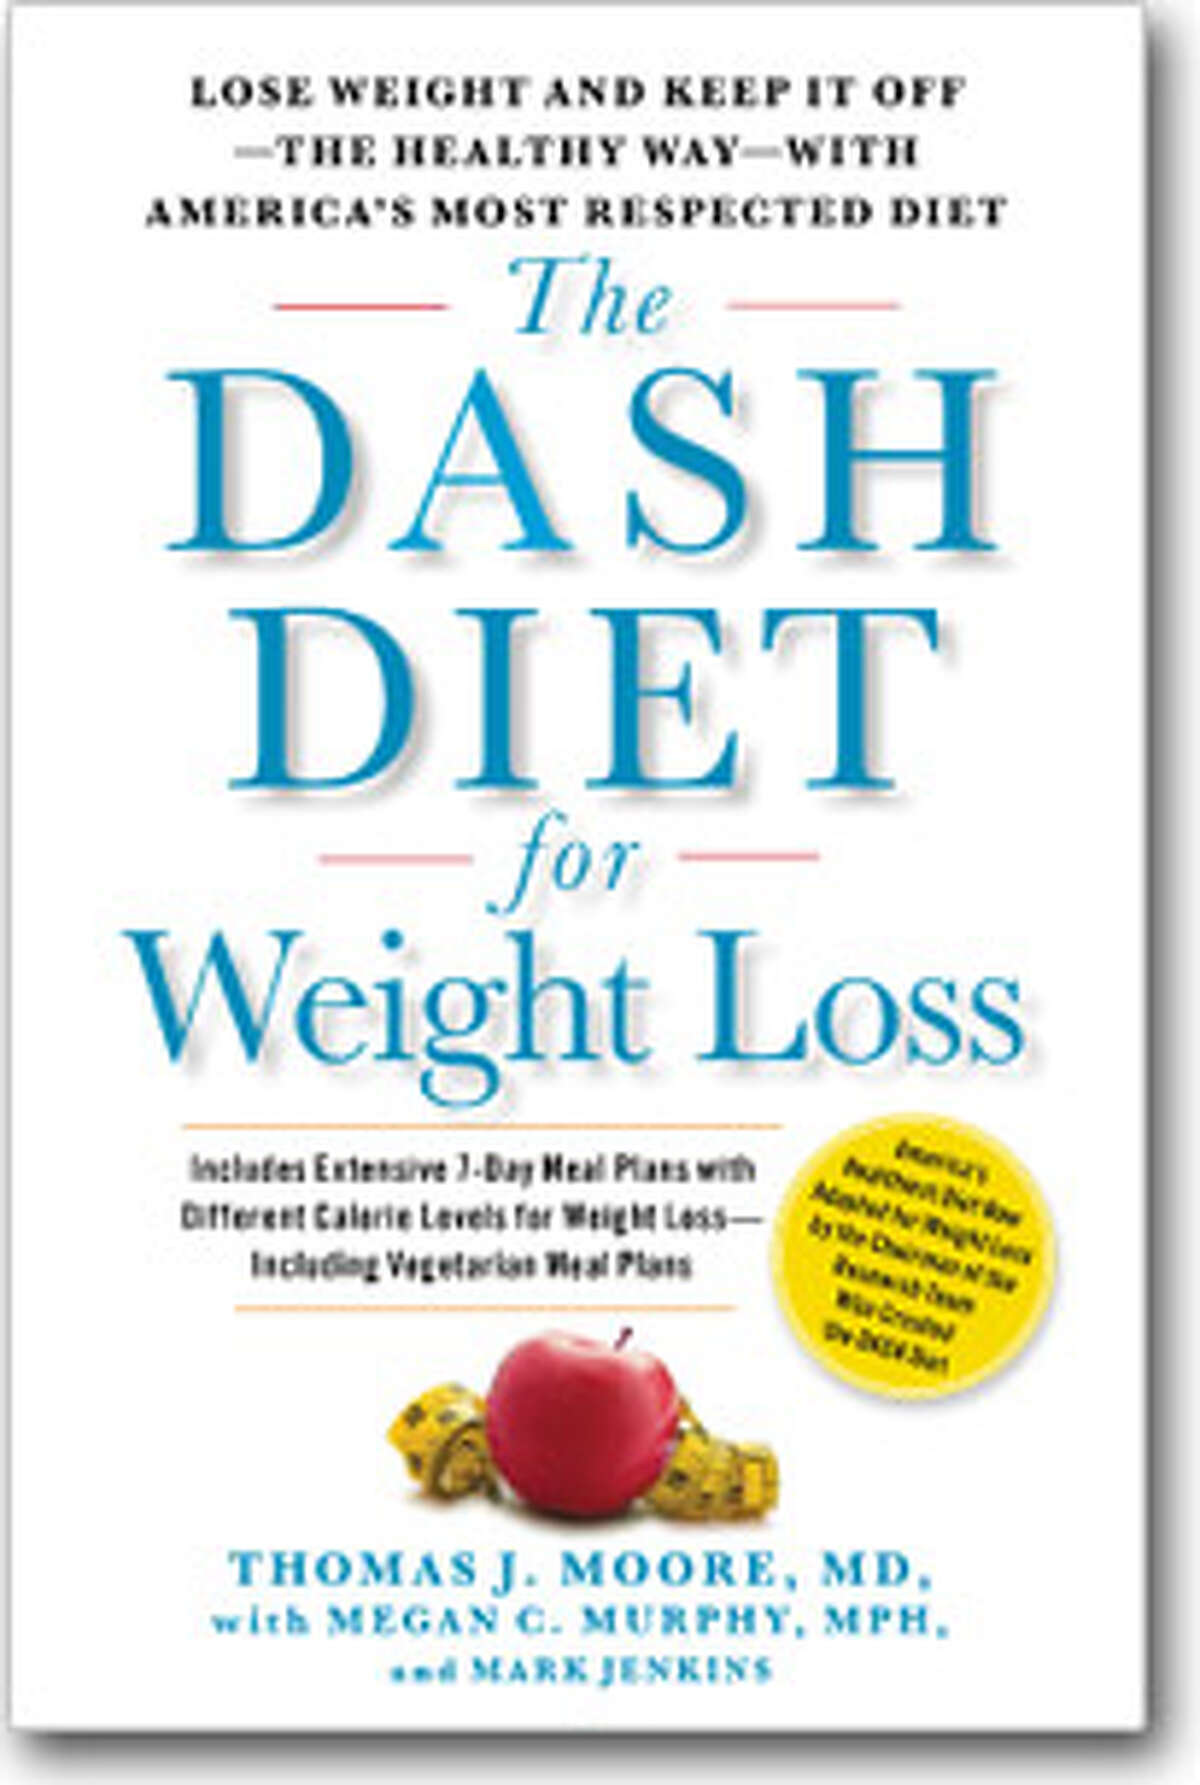 "The Dash Diet for Weight Loss" by Thomas J. Moore with Megan C. Murphy and Mark Jenkins